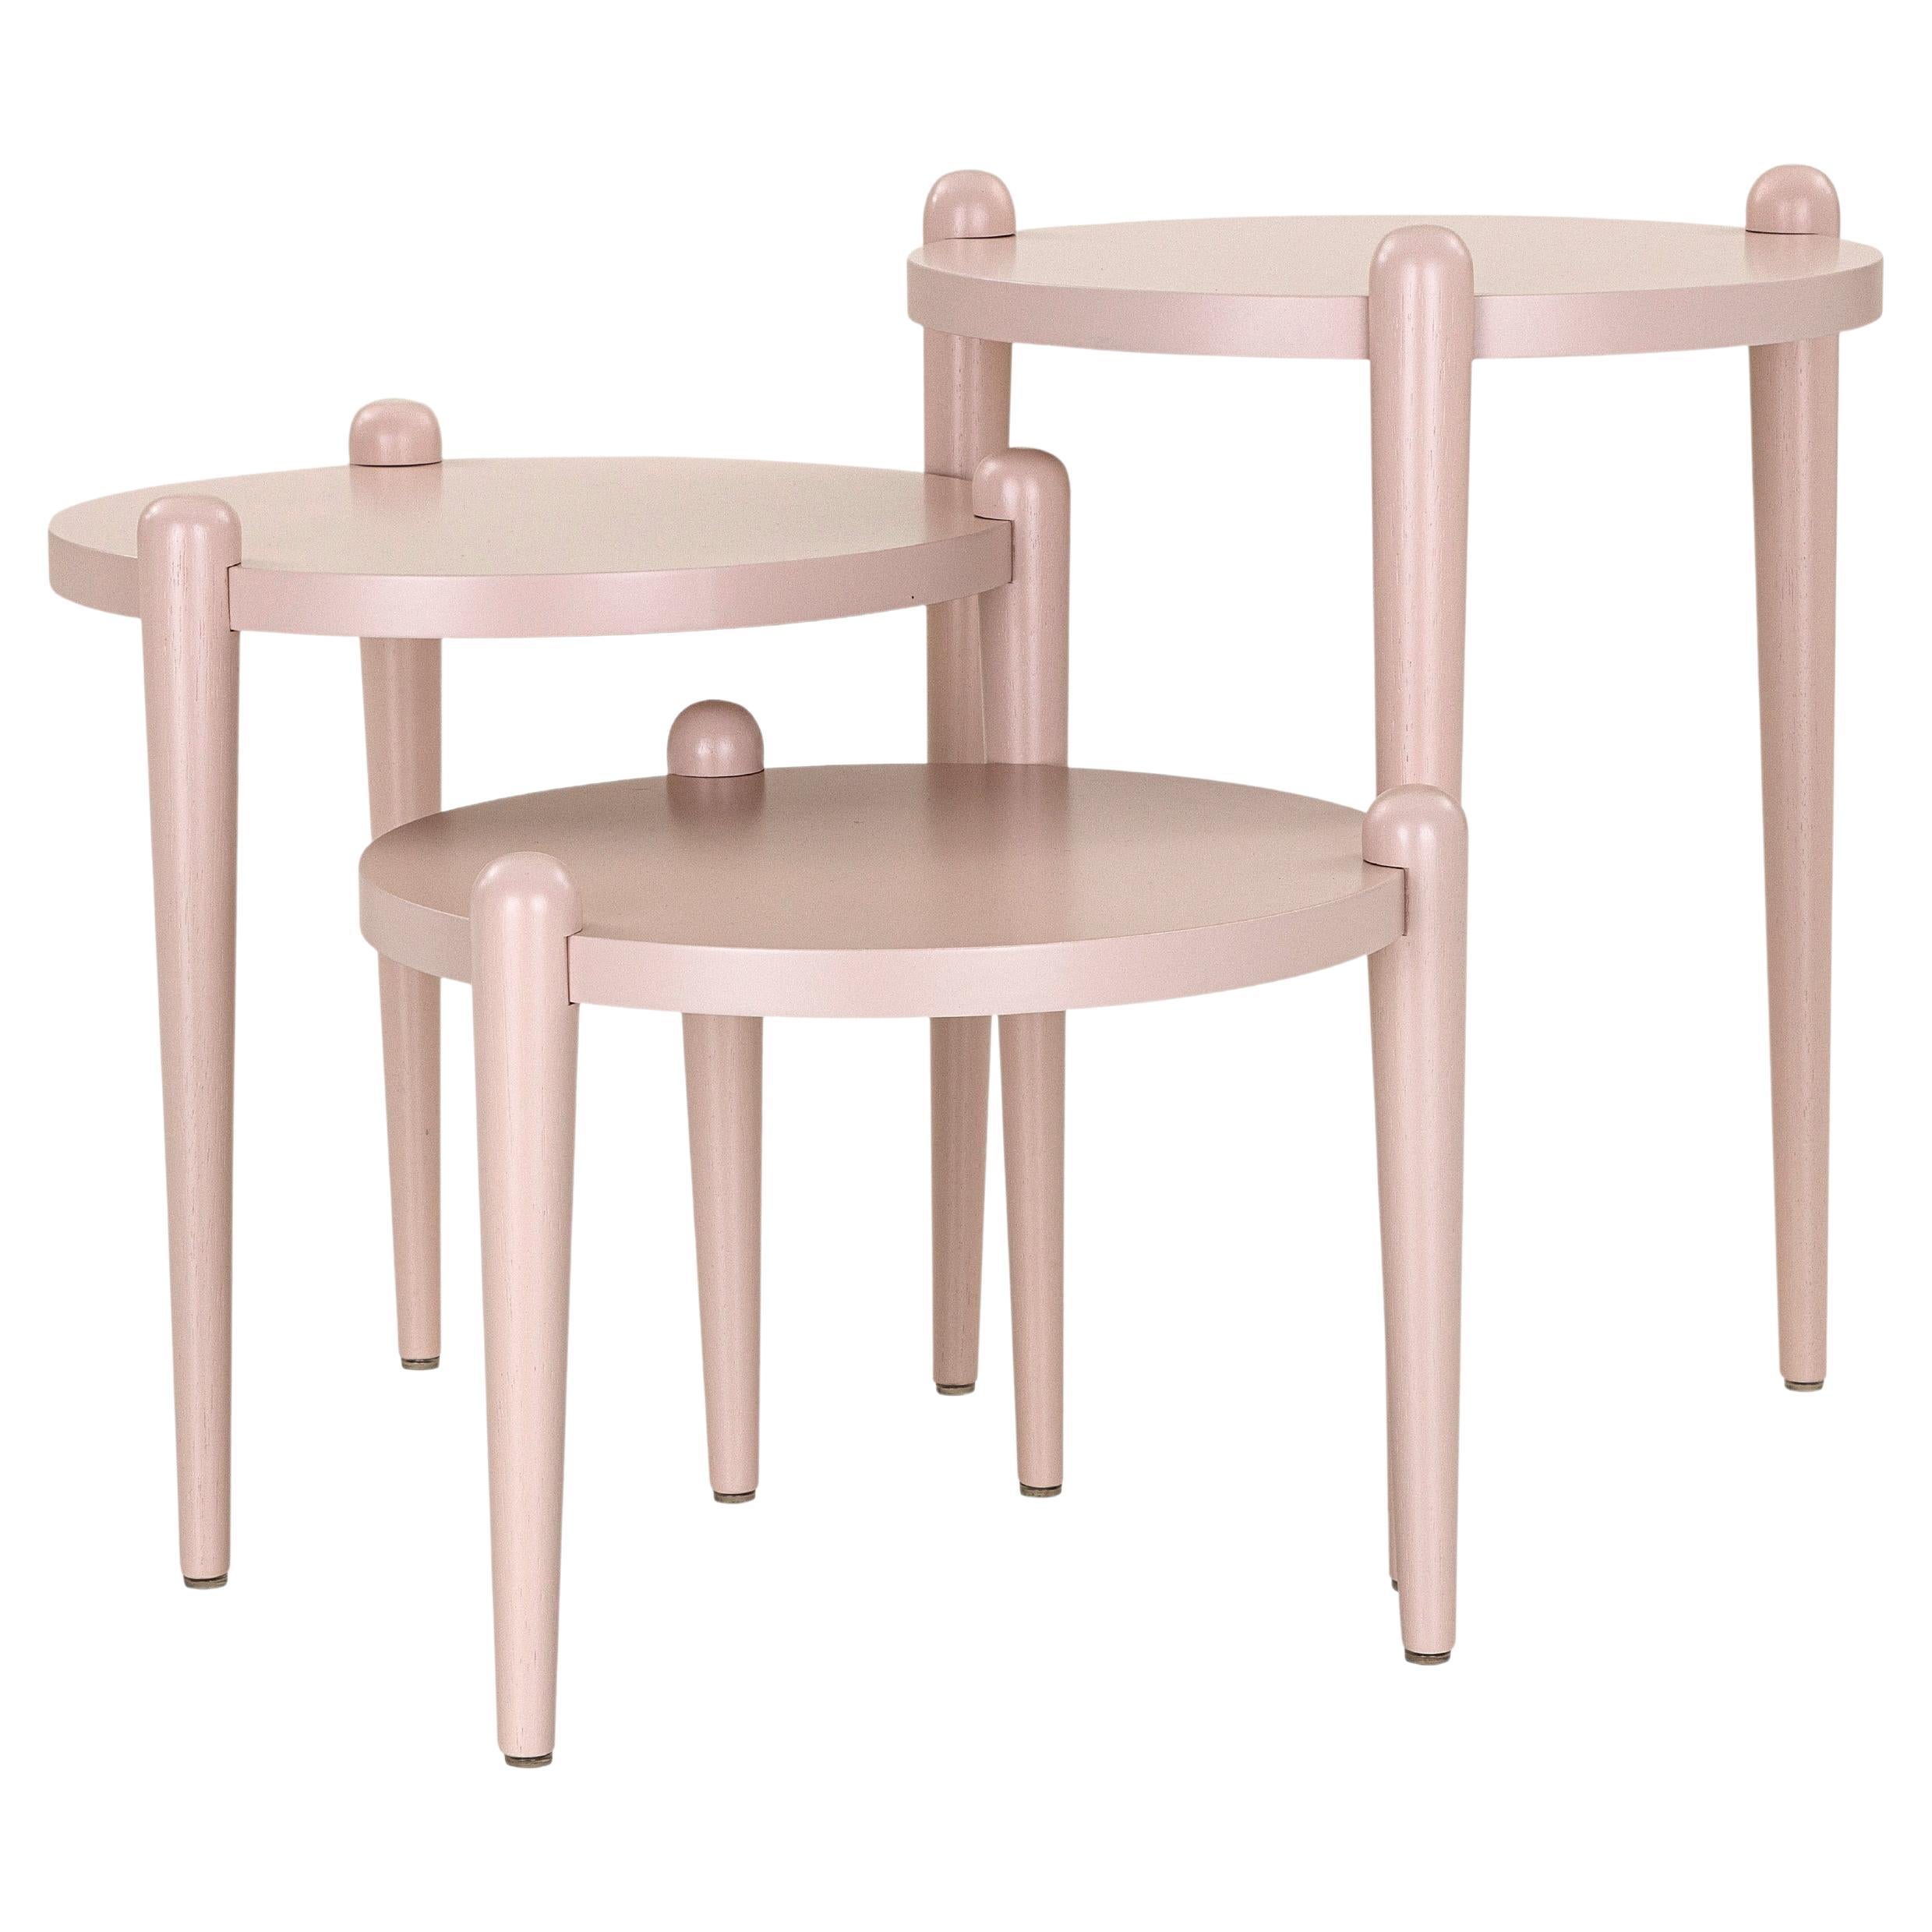 Pan Contemporary Side Tables in Light Pink Quartz Finish, Set of 3 For Sale